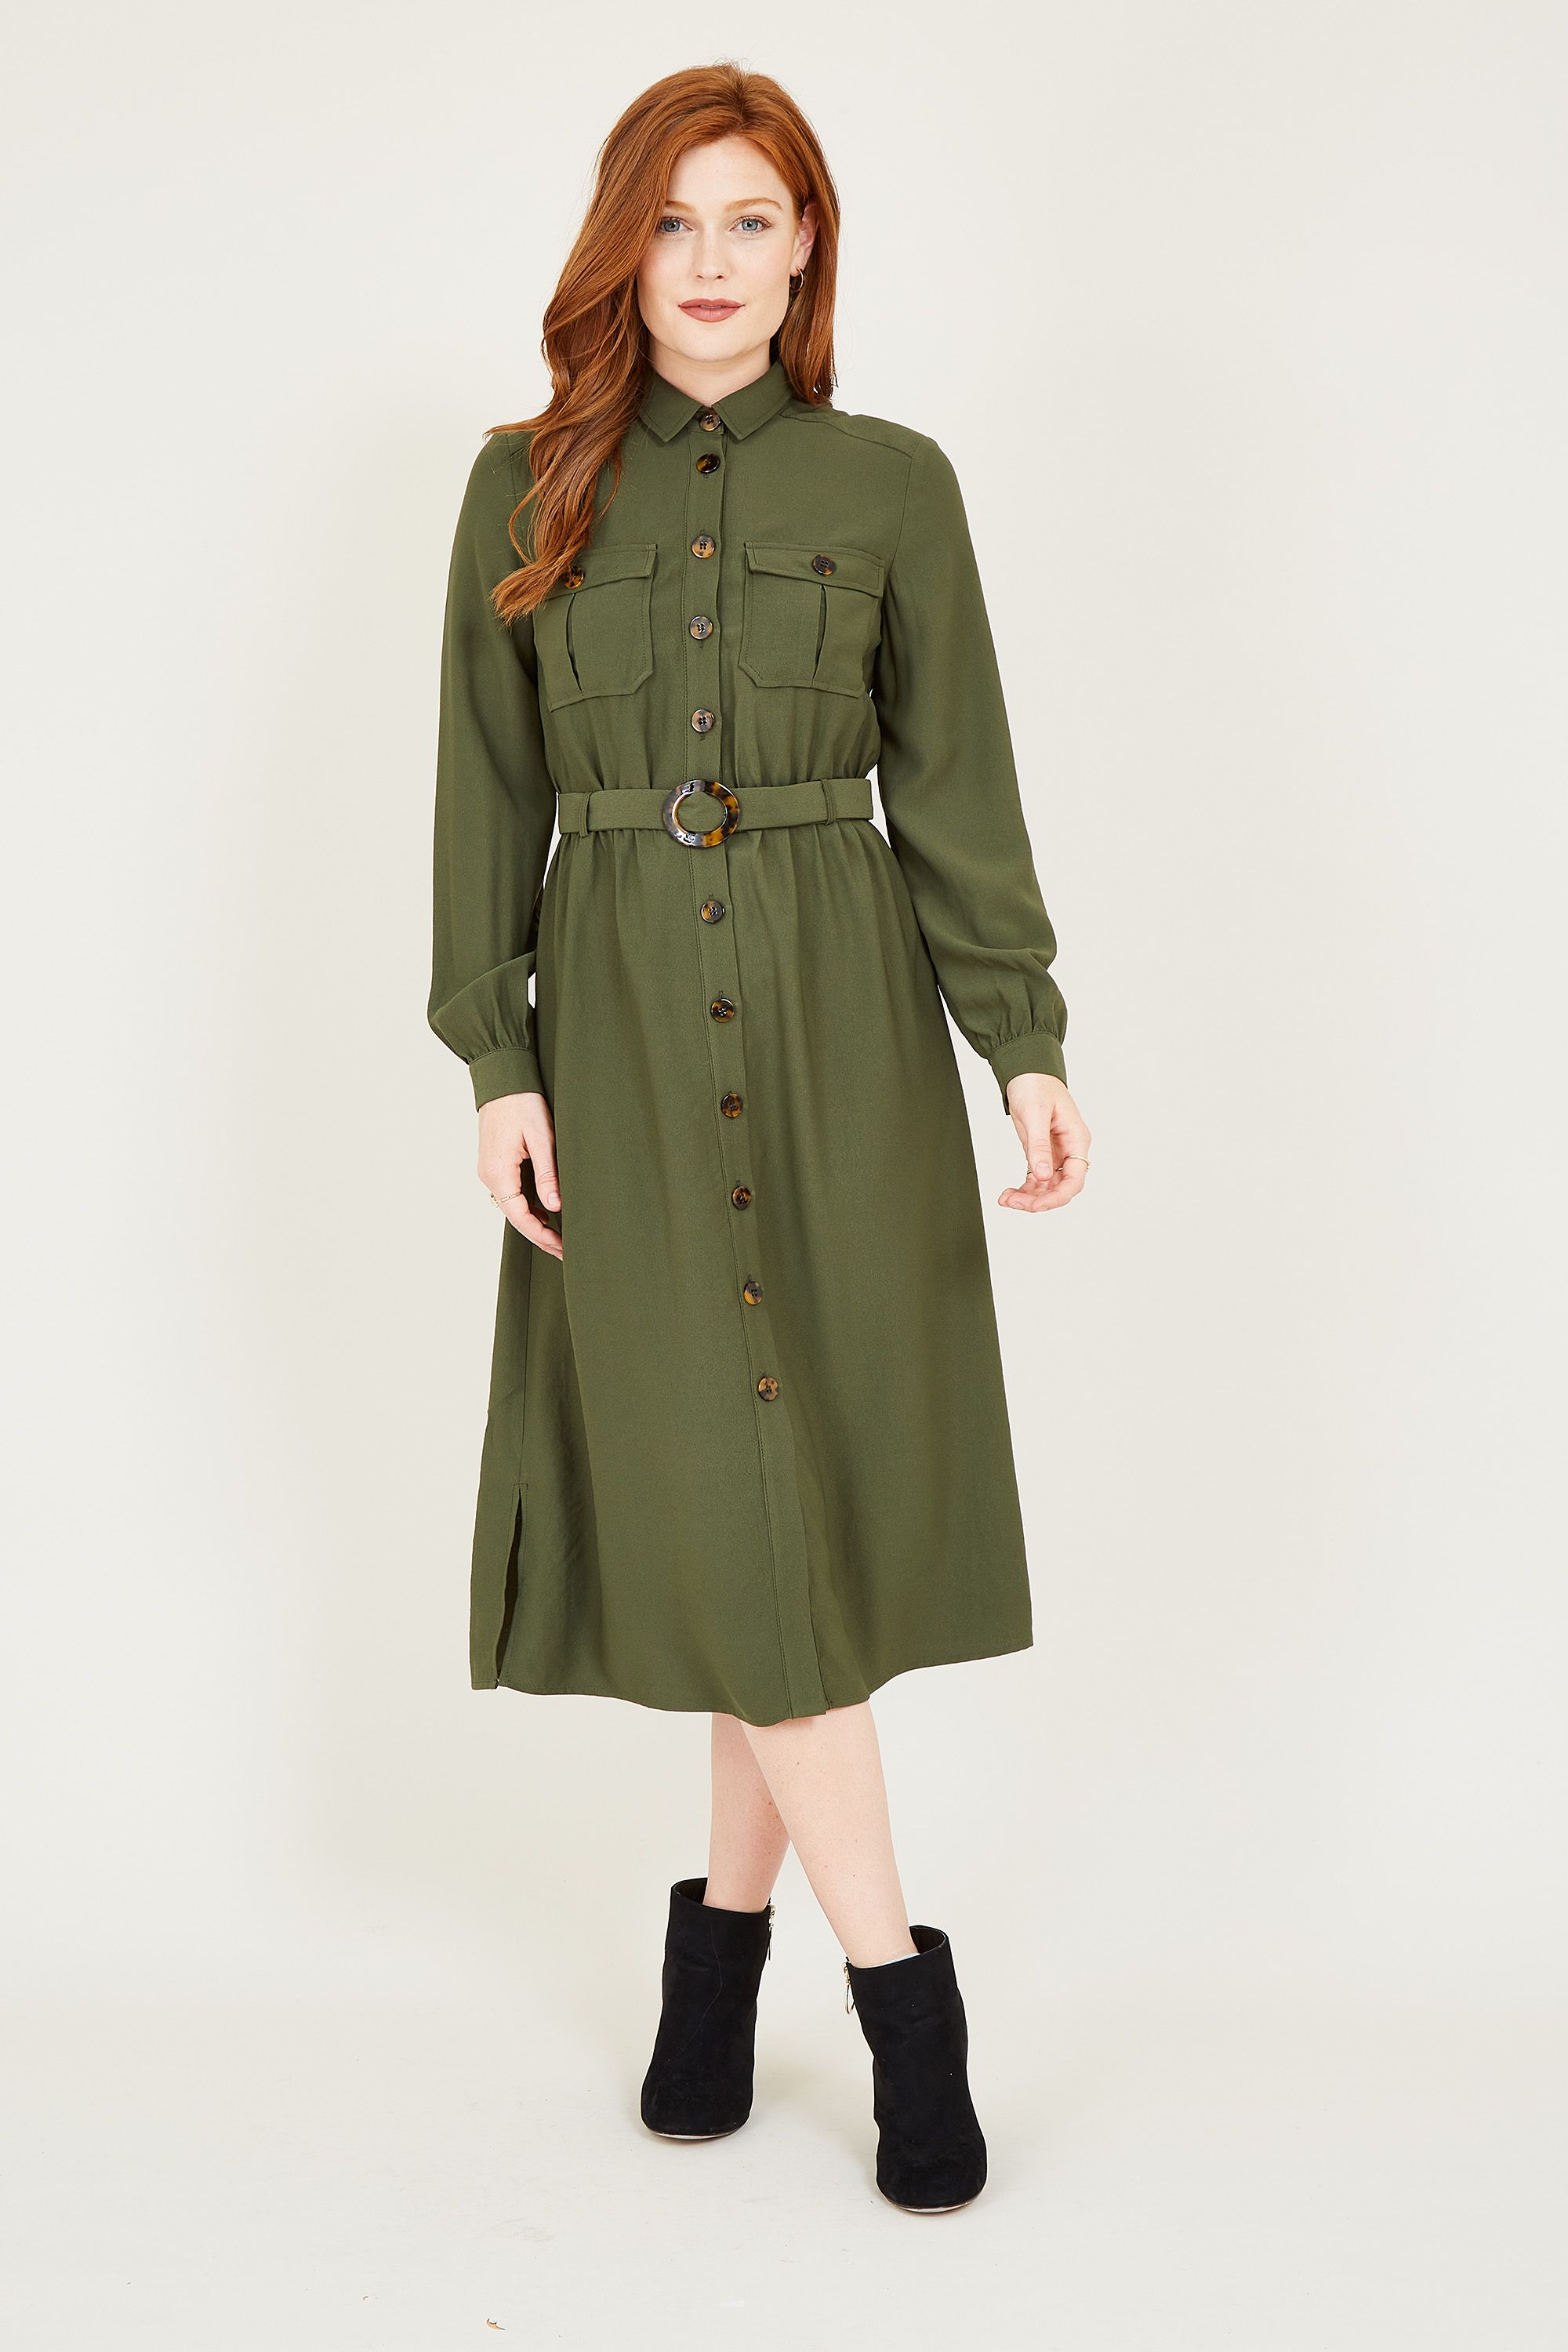 Stand to attention (and sit in total comfort) in this Military Shirt Dress; perfect for weekends and off-duty moments. With a refined knee-length cut, it features long rolled sleeves, a button front, and a flattering self-tie waist. Complete with a touch of khaki green charm, complement your look with knee-high boots.